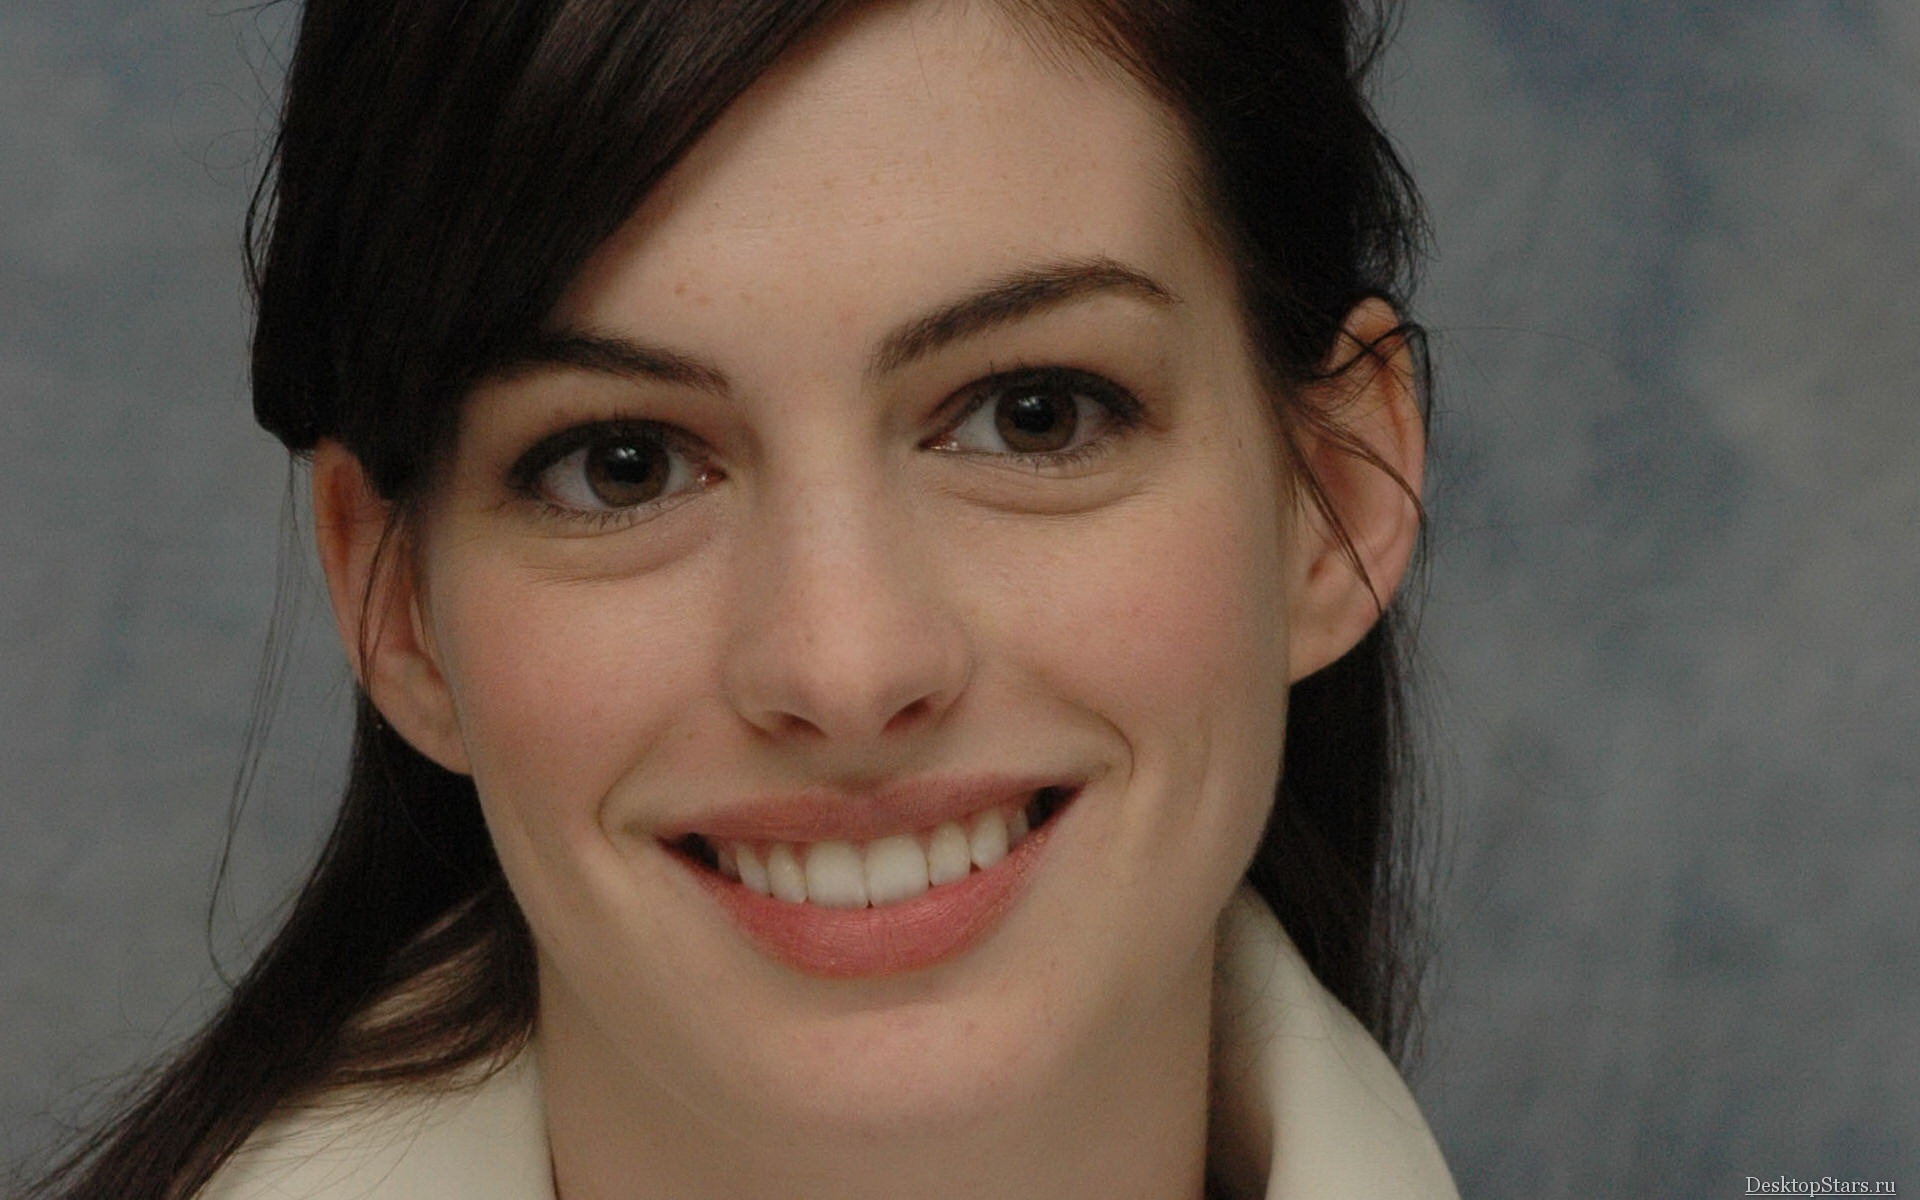 Anne Hathaway #002 - 1920x1200 Wallpapers Pictures Photos Images